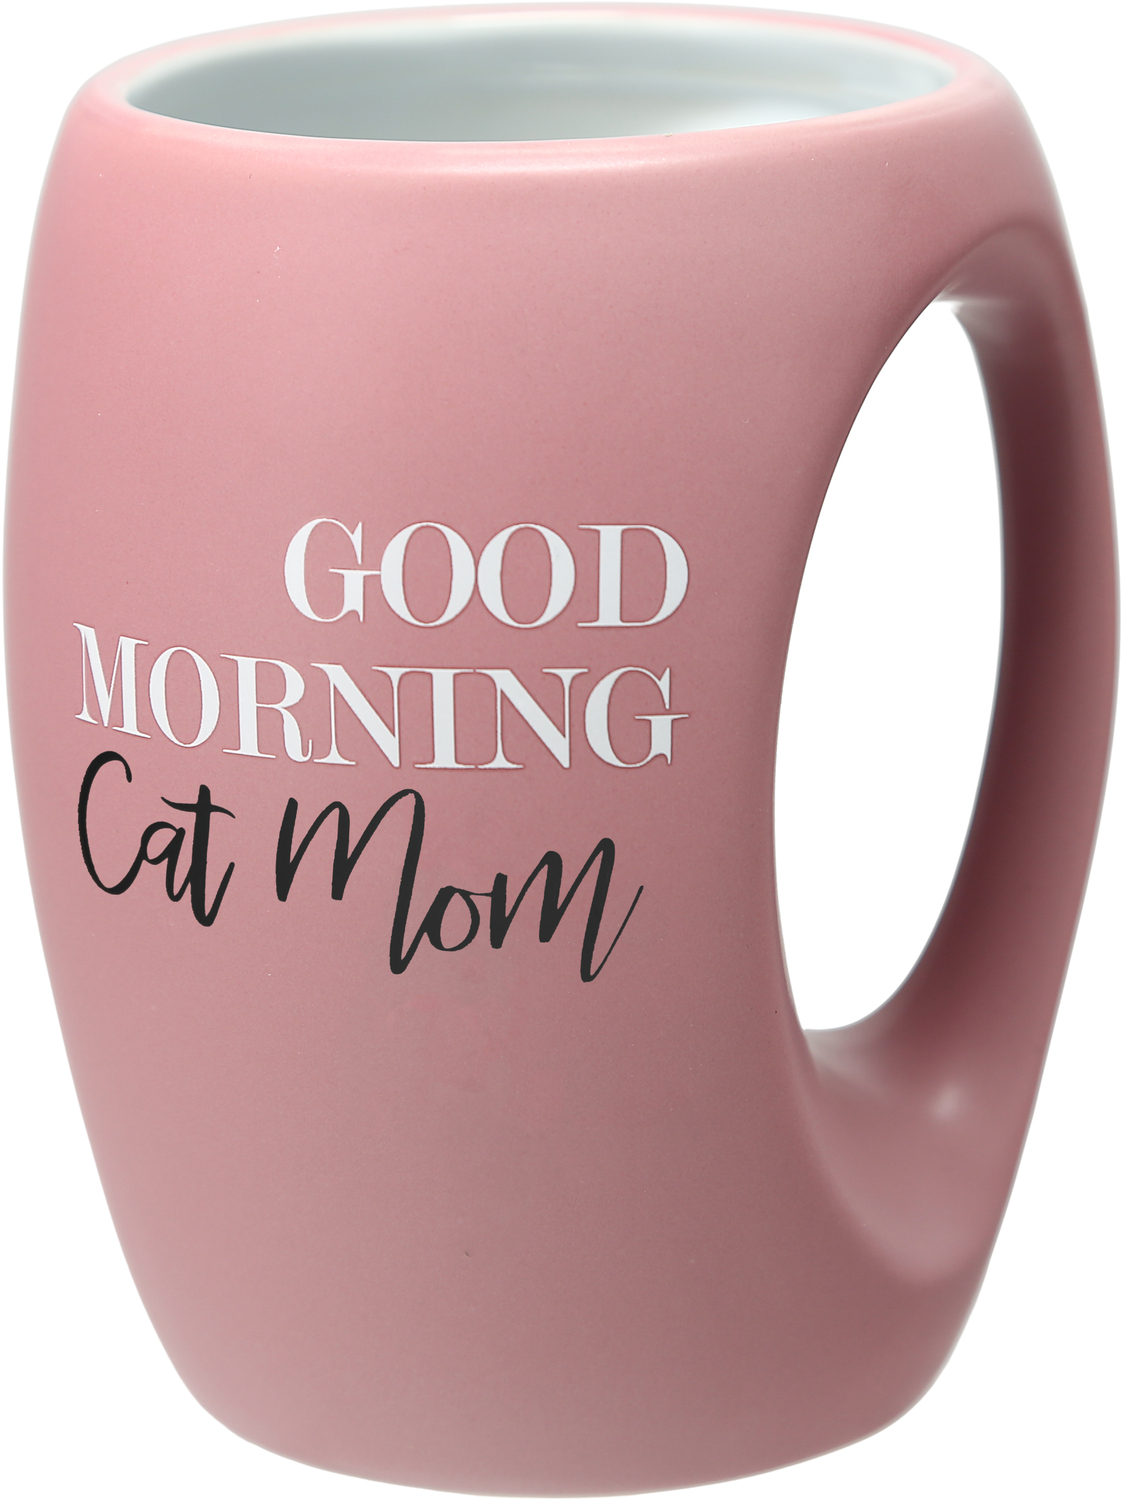 Cat Mom by Good Morning - Cat Mom - 16 oz Cup